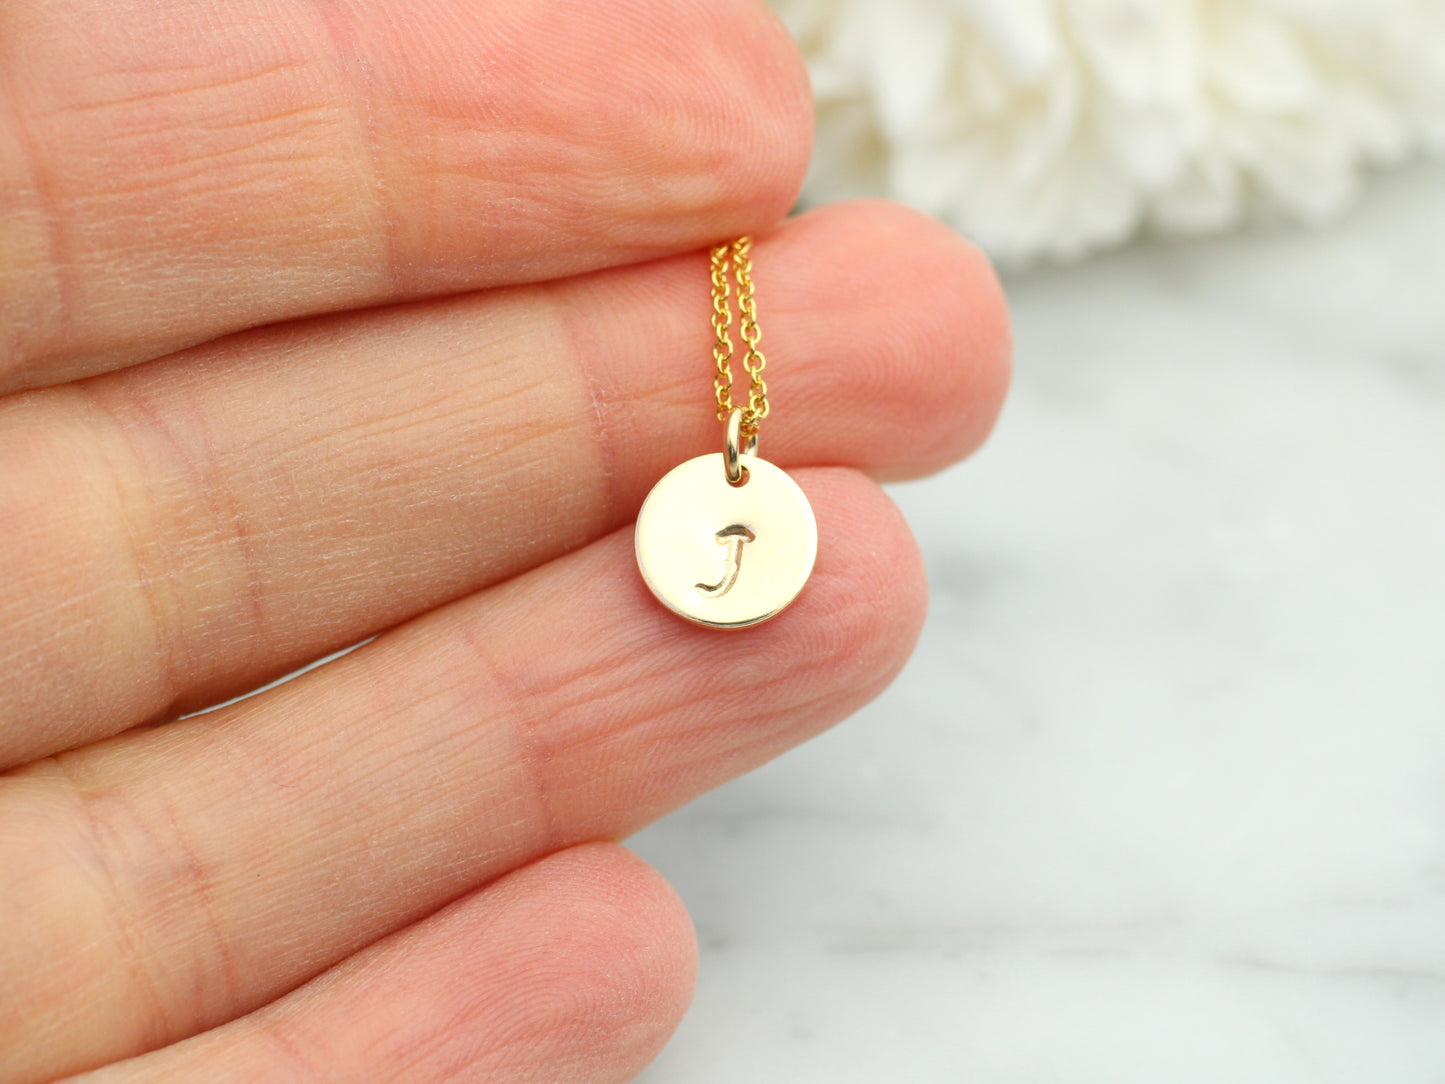 Initial necklace in gold. Choose up to 4 tags.